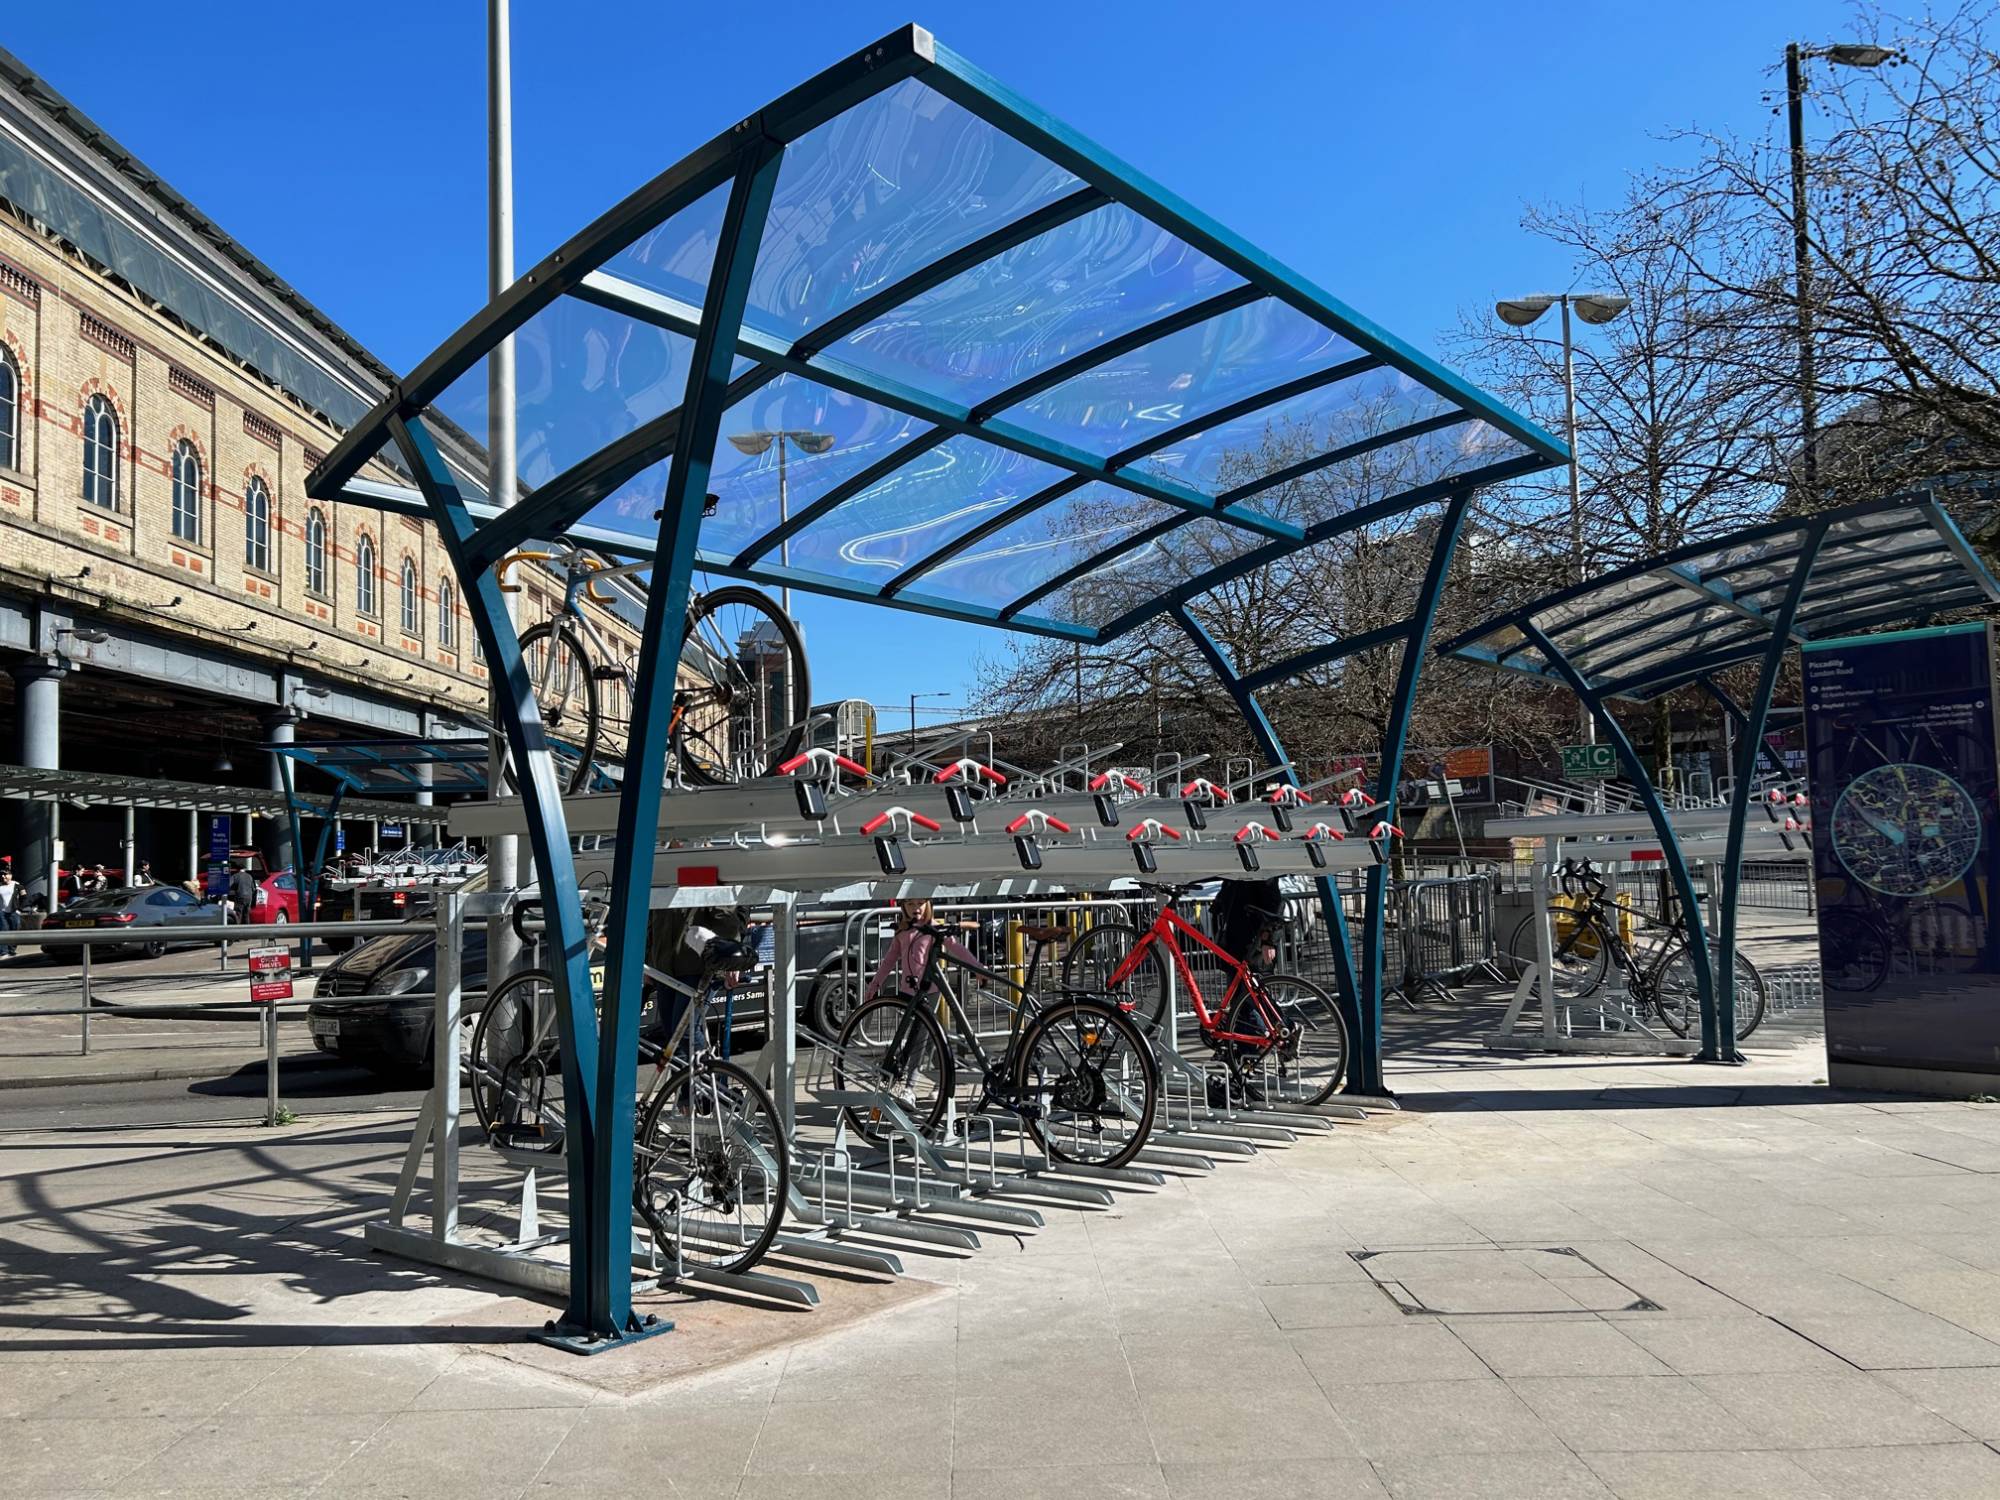 FalcoRail Cycle Shelter - Open and Spacious Cycle Shelter Canopy